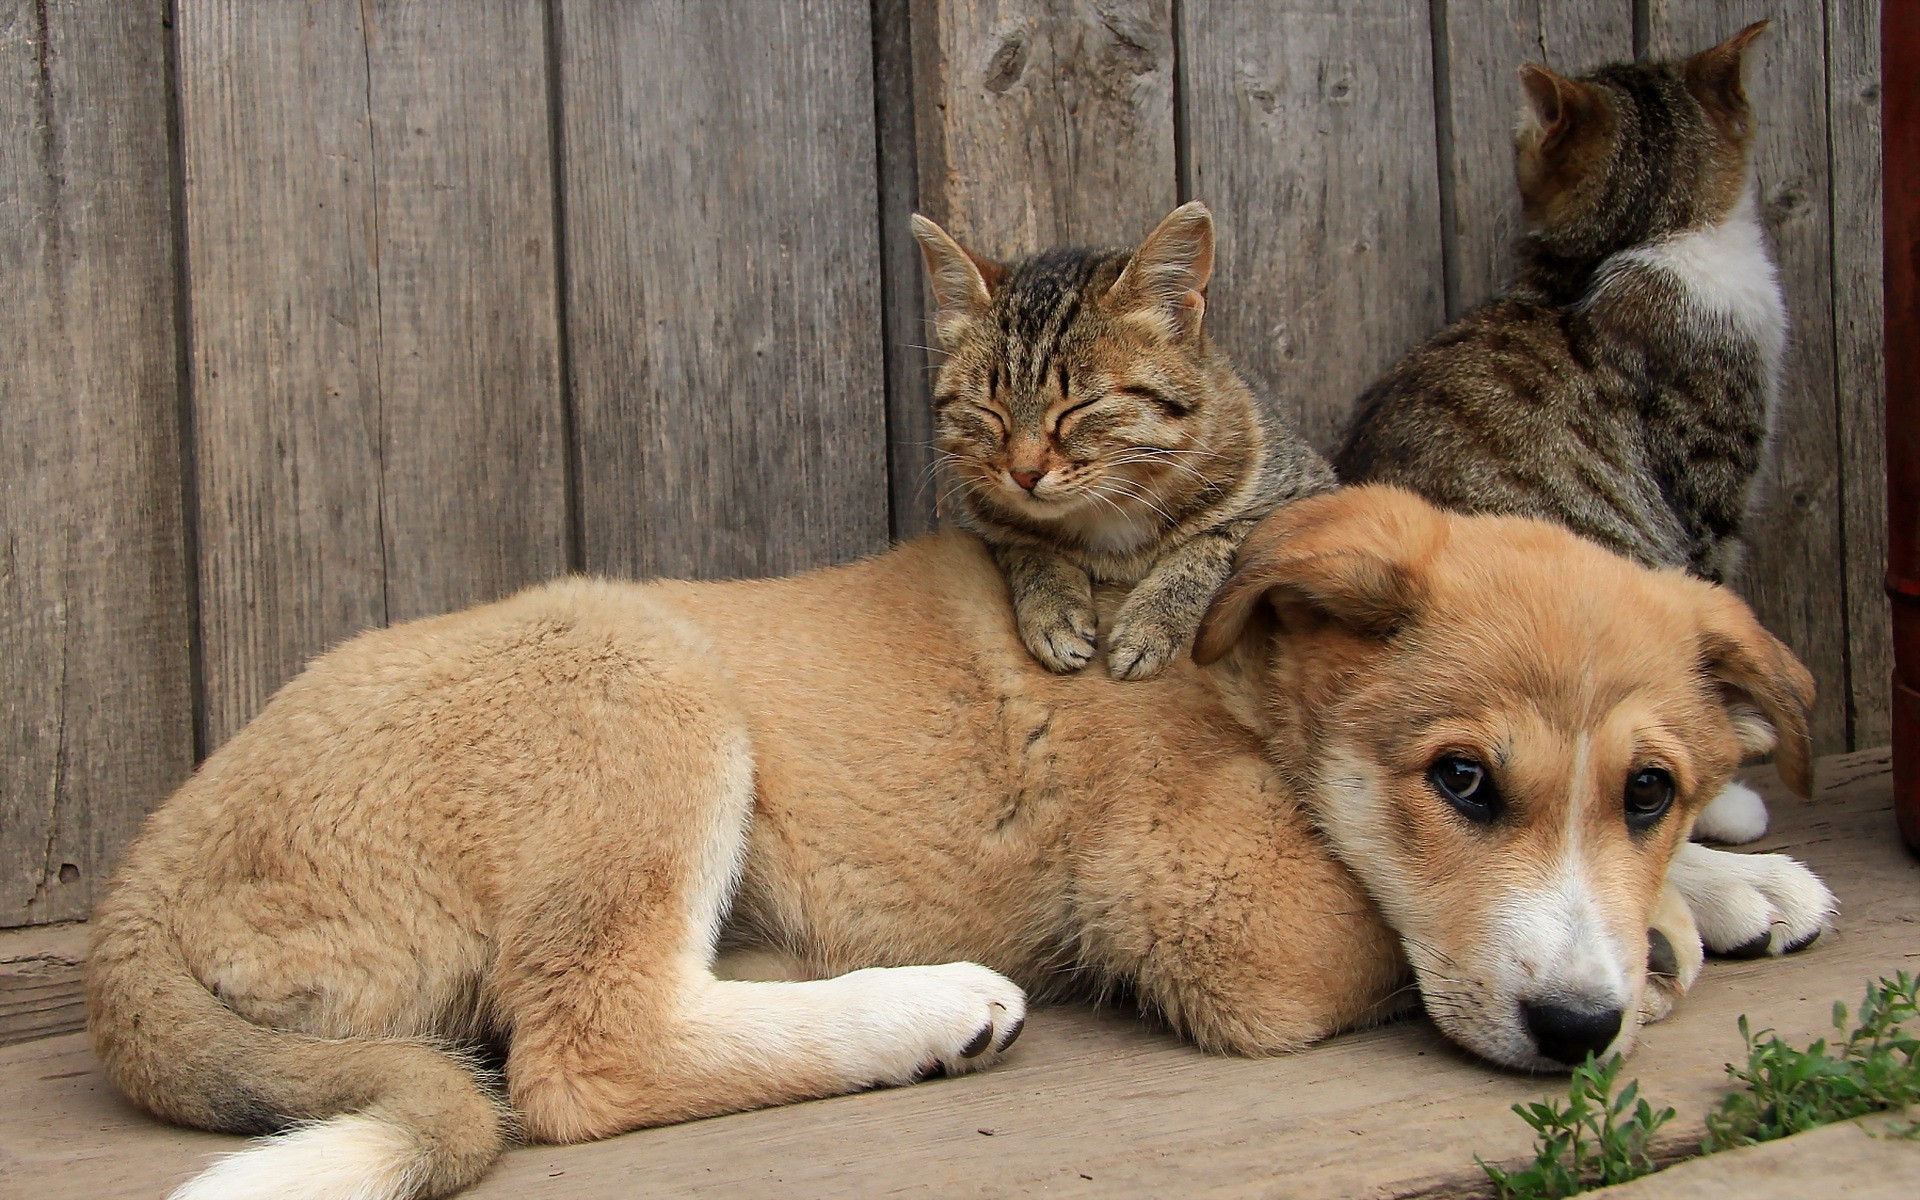 Cat and Dog Wallpaper (56+ images)